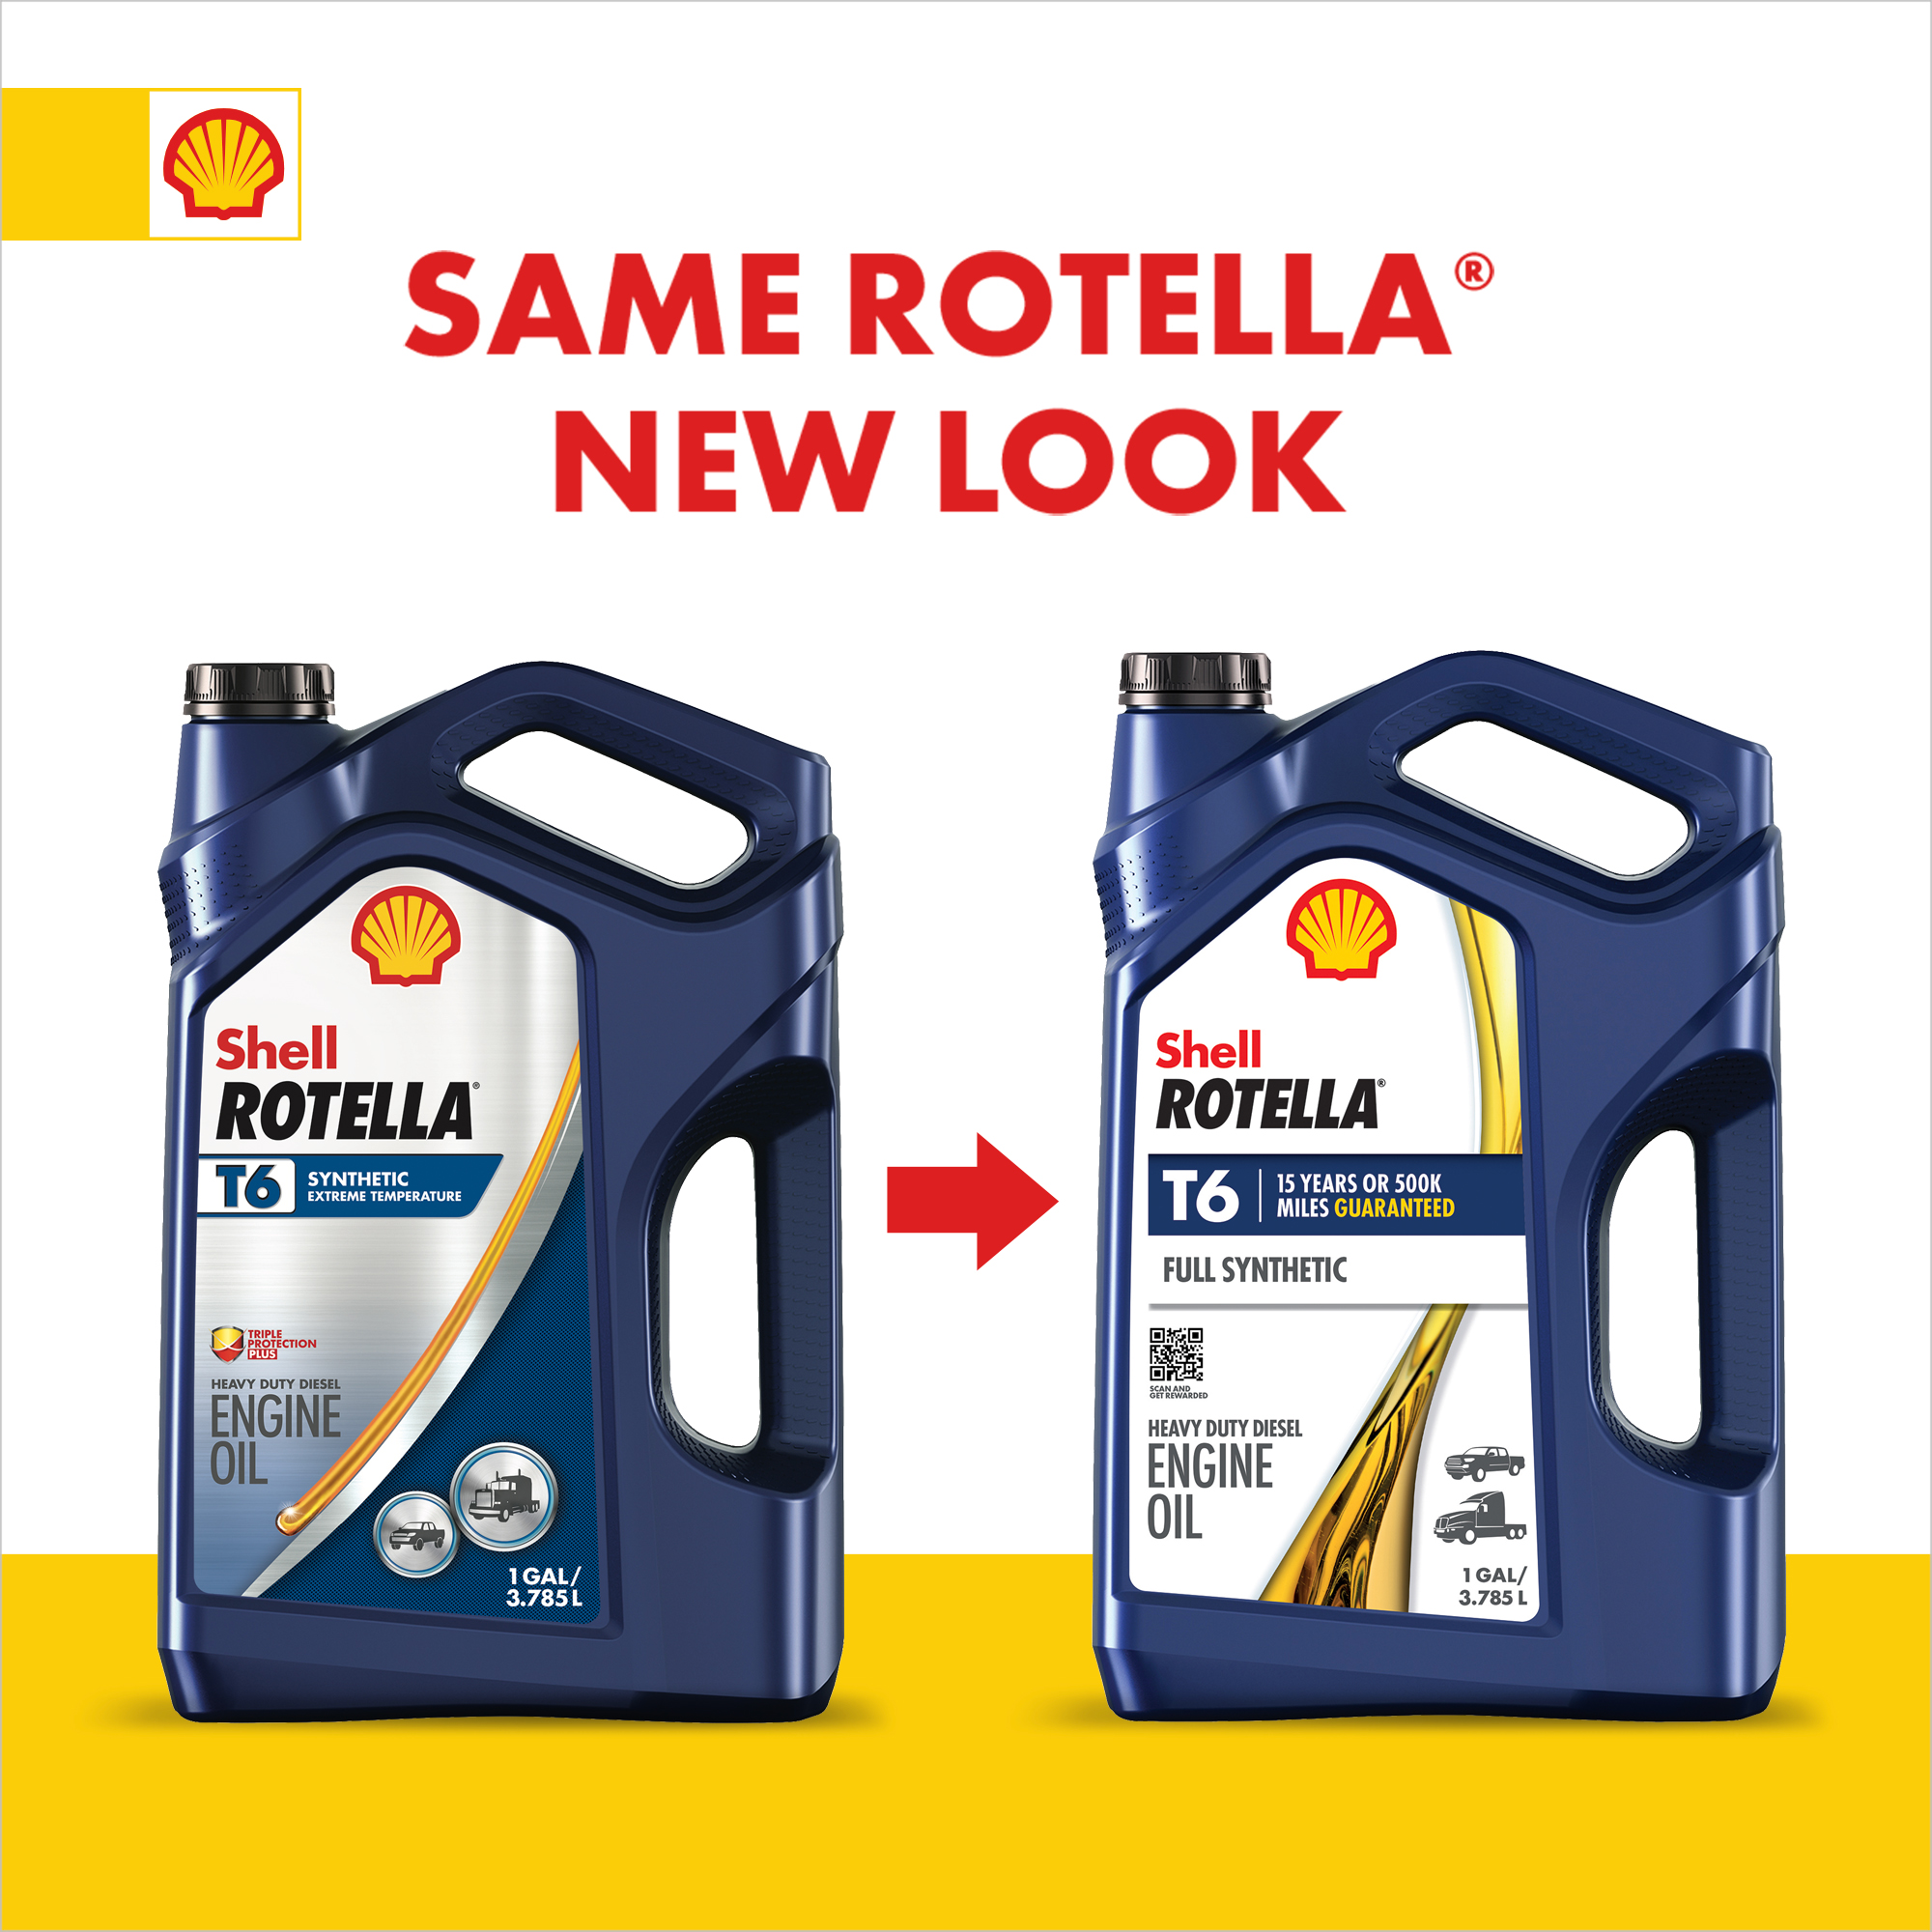 Shell Rotella T6 Full Synthetic 5W-40 Diesel Engine Oil, 1 Gallon - image 4 of 9